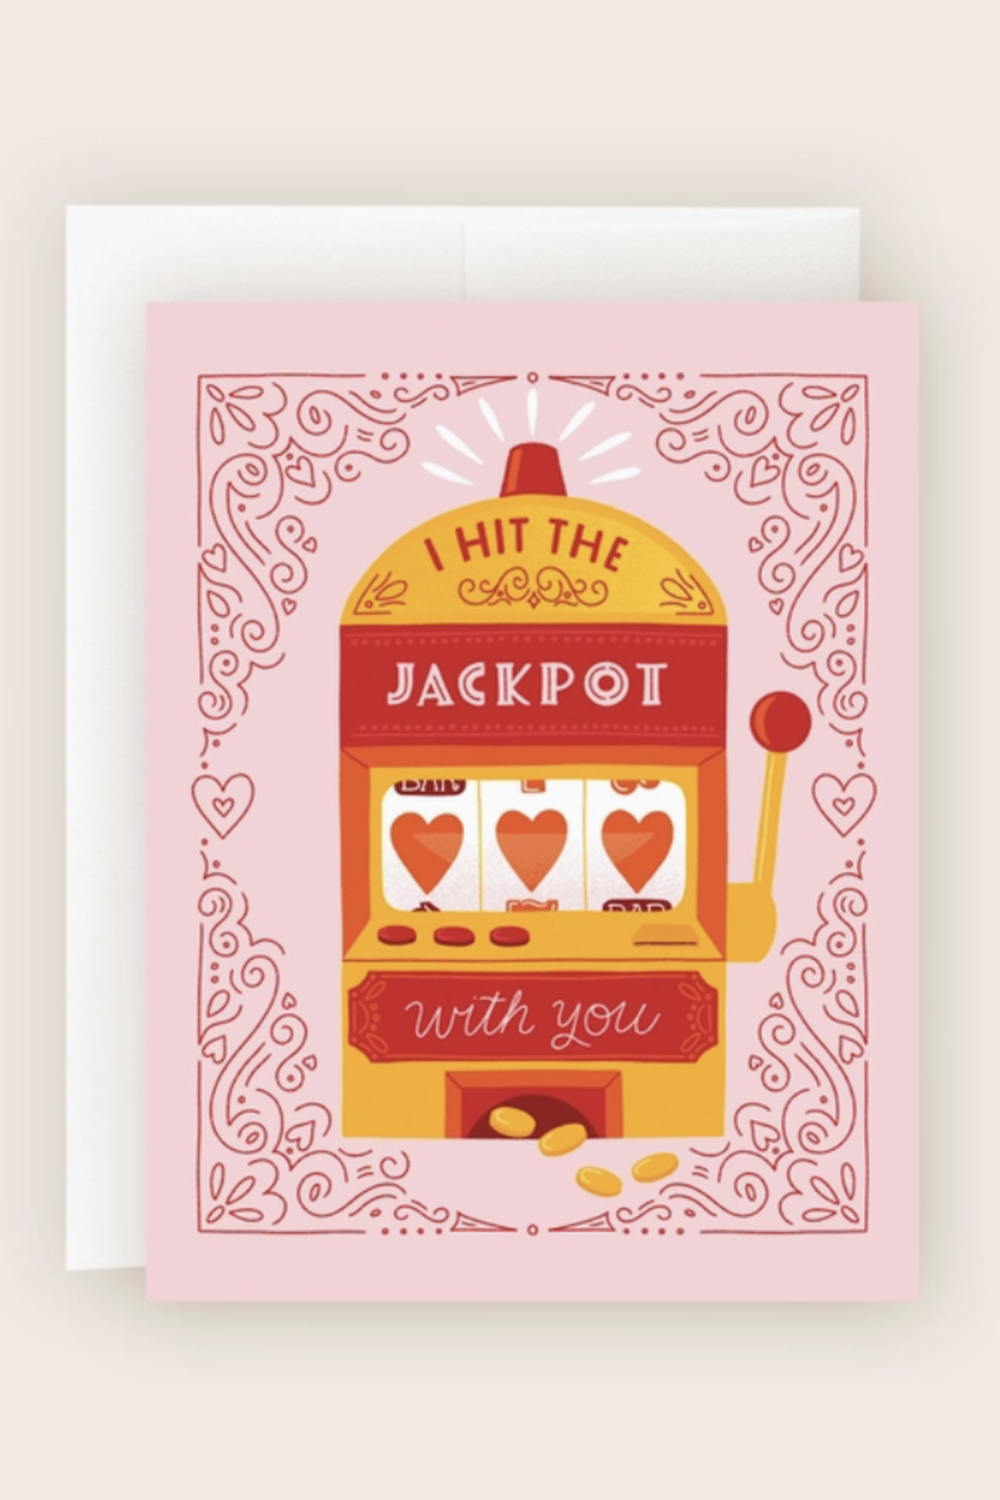 Pea Valentine's Day Card - Hit the Jackpot